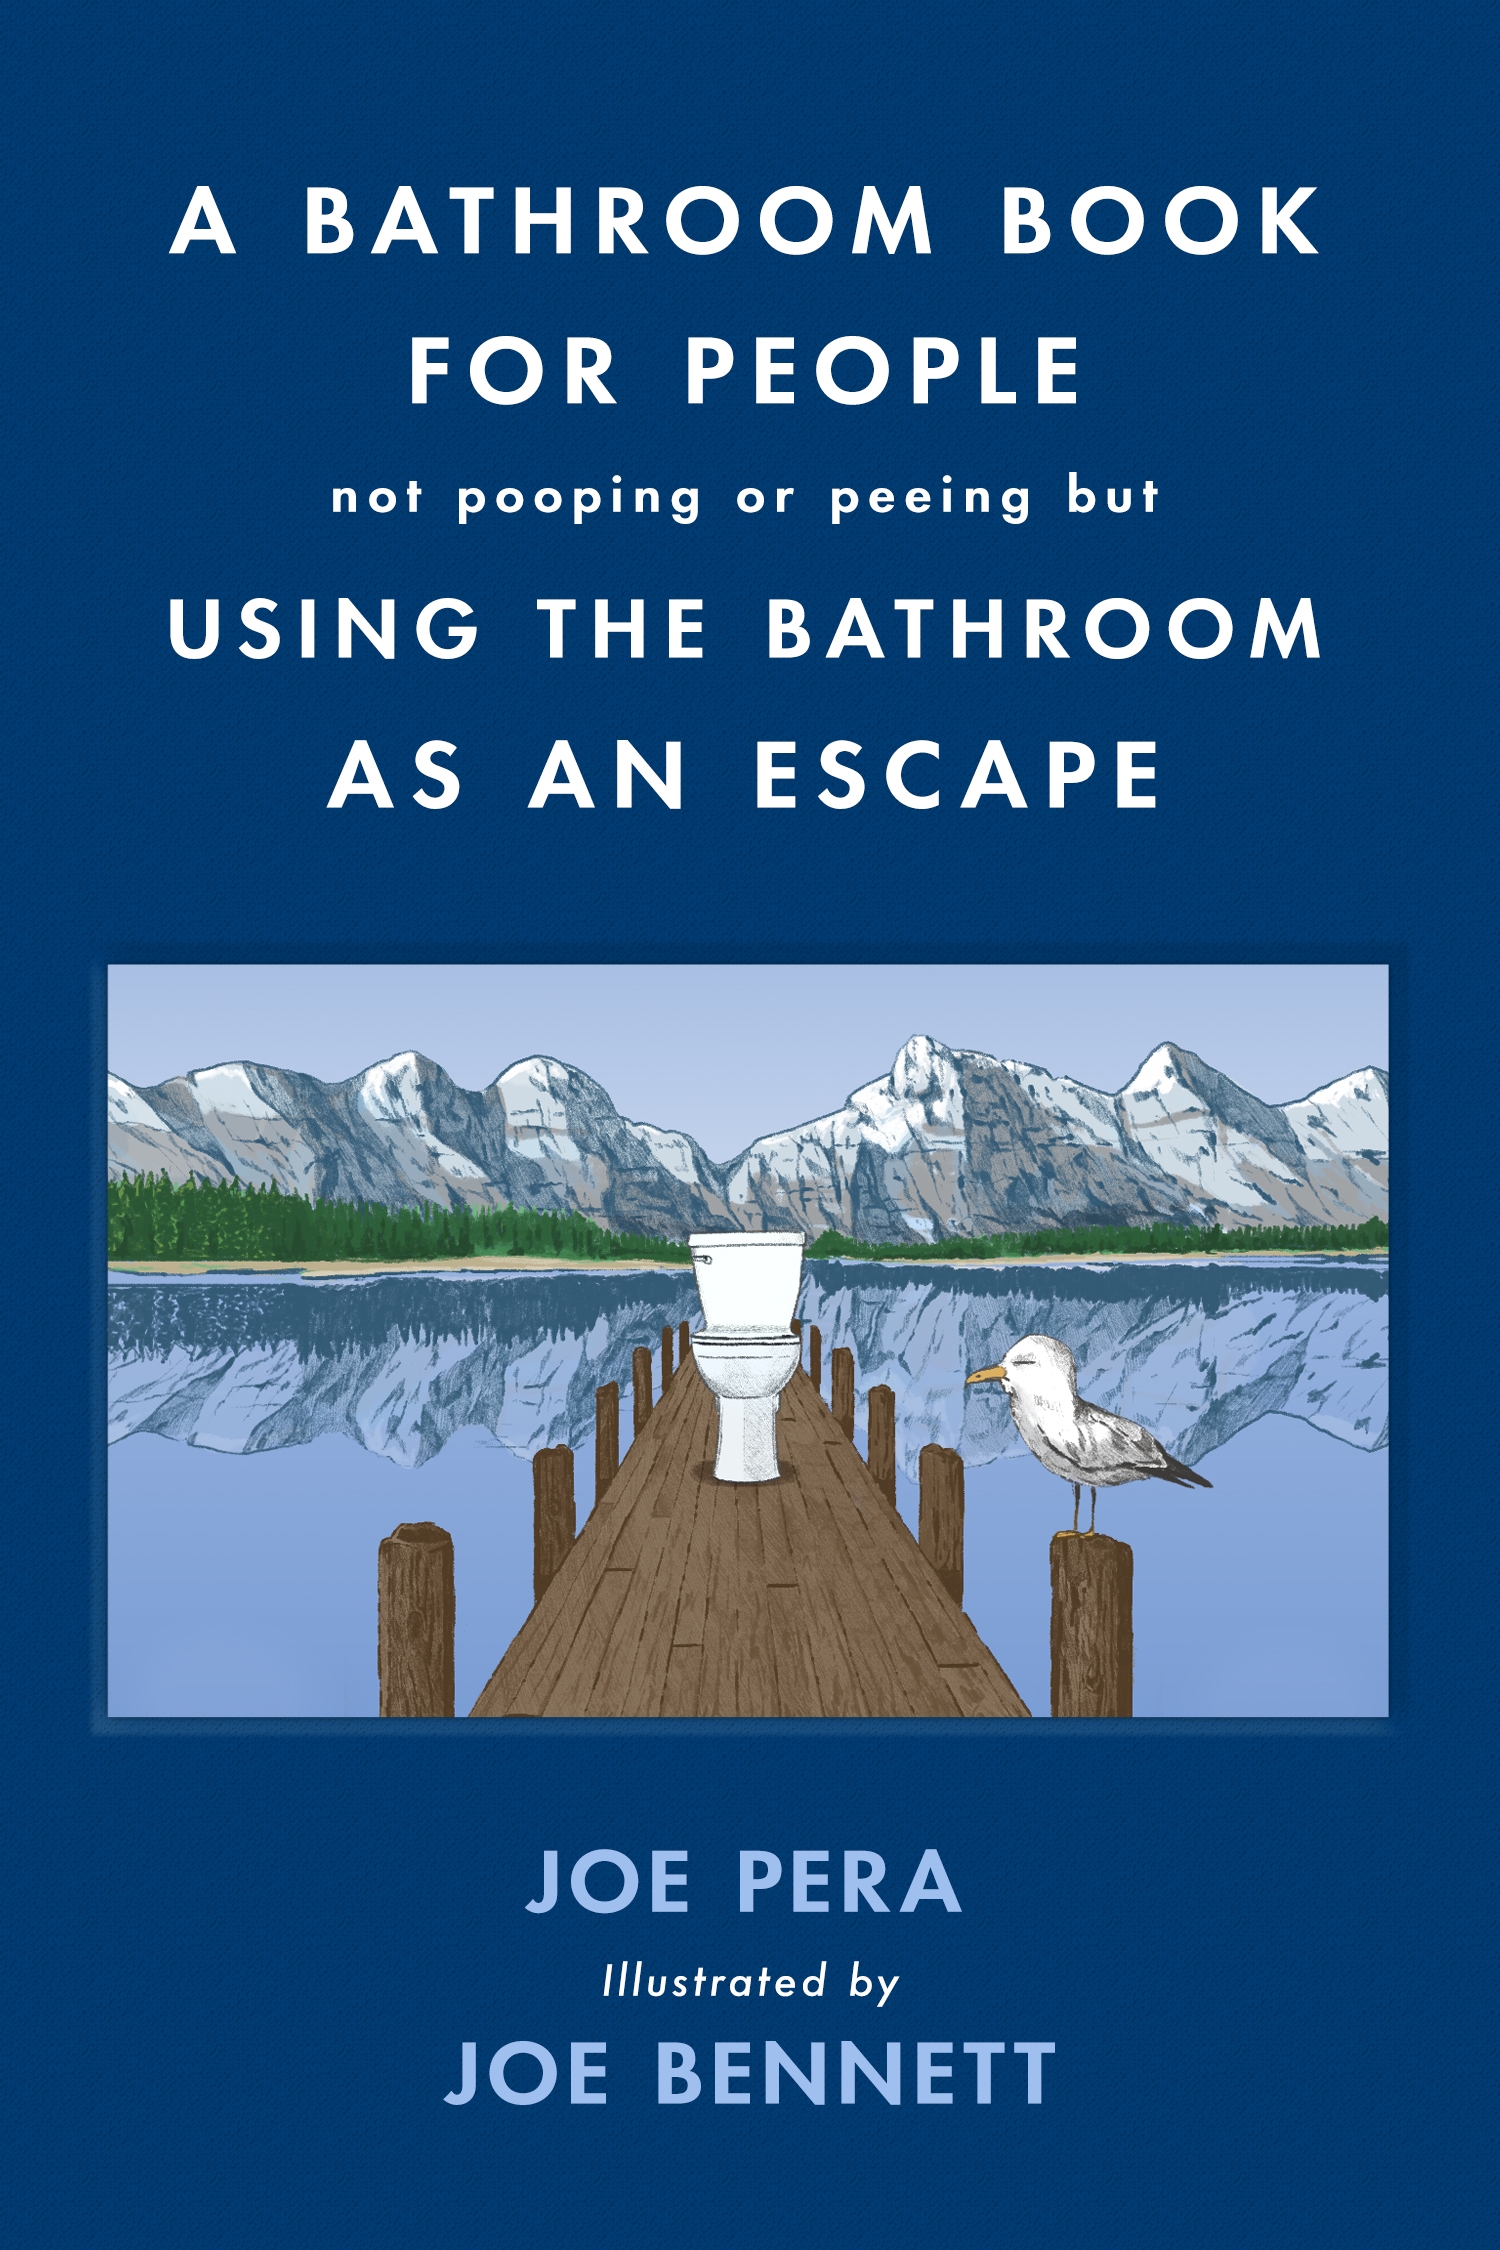 A Bathroom Book for People Not Pooping or Peeing but Using the Bathroom as an Escape by Joe Pera, Joe Bennett